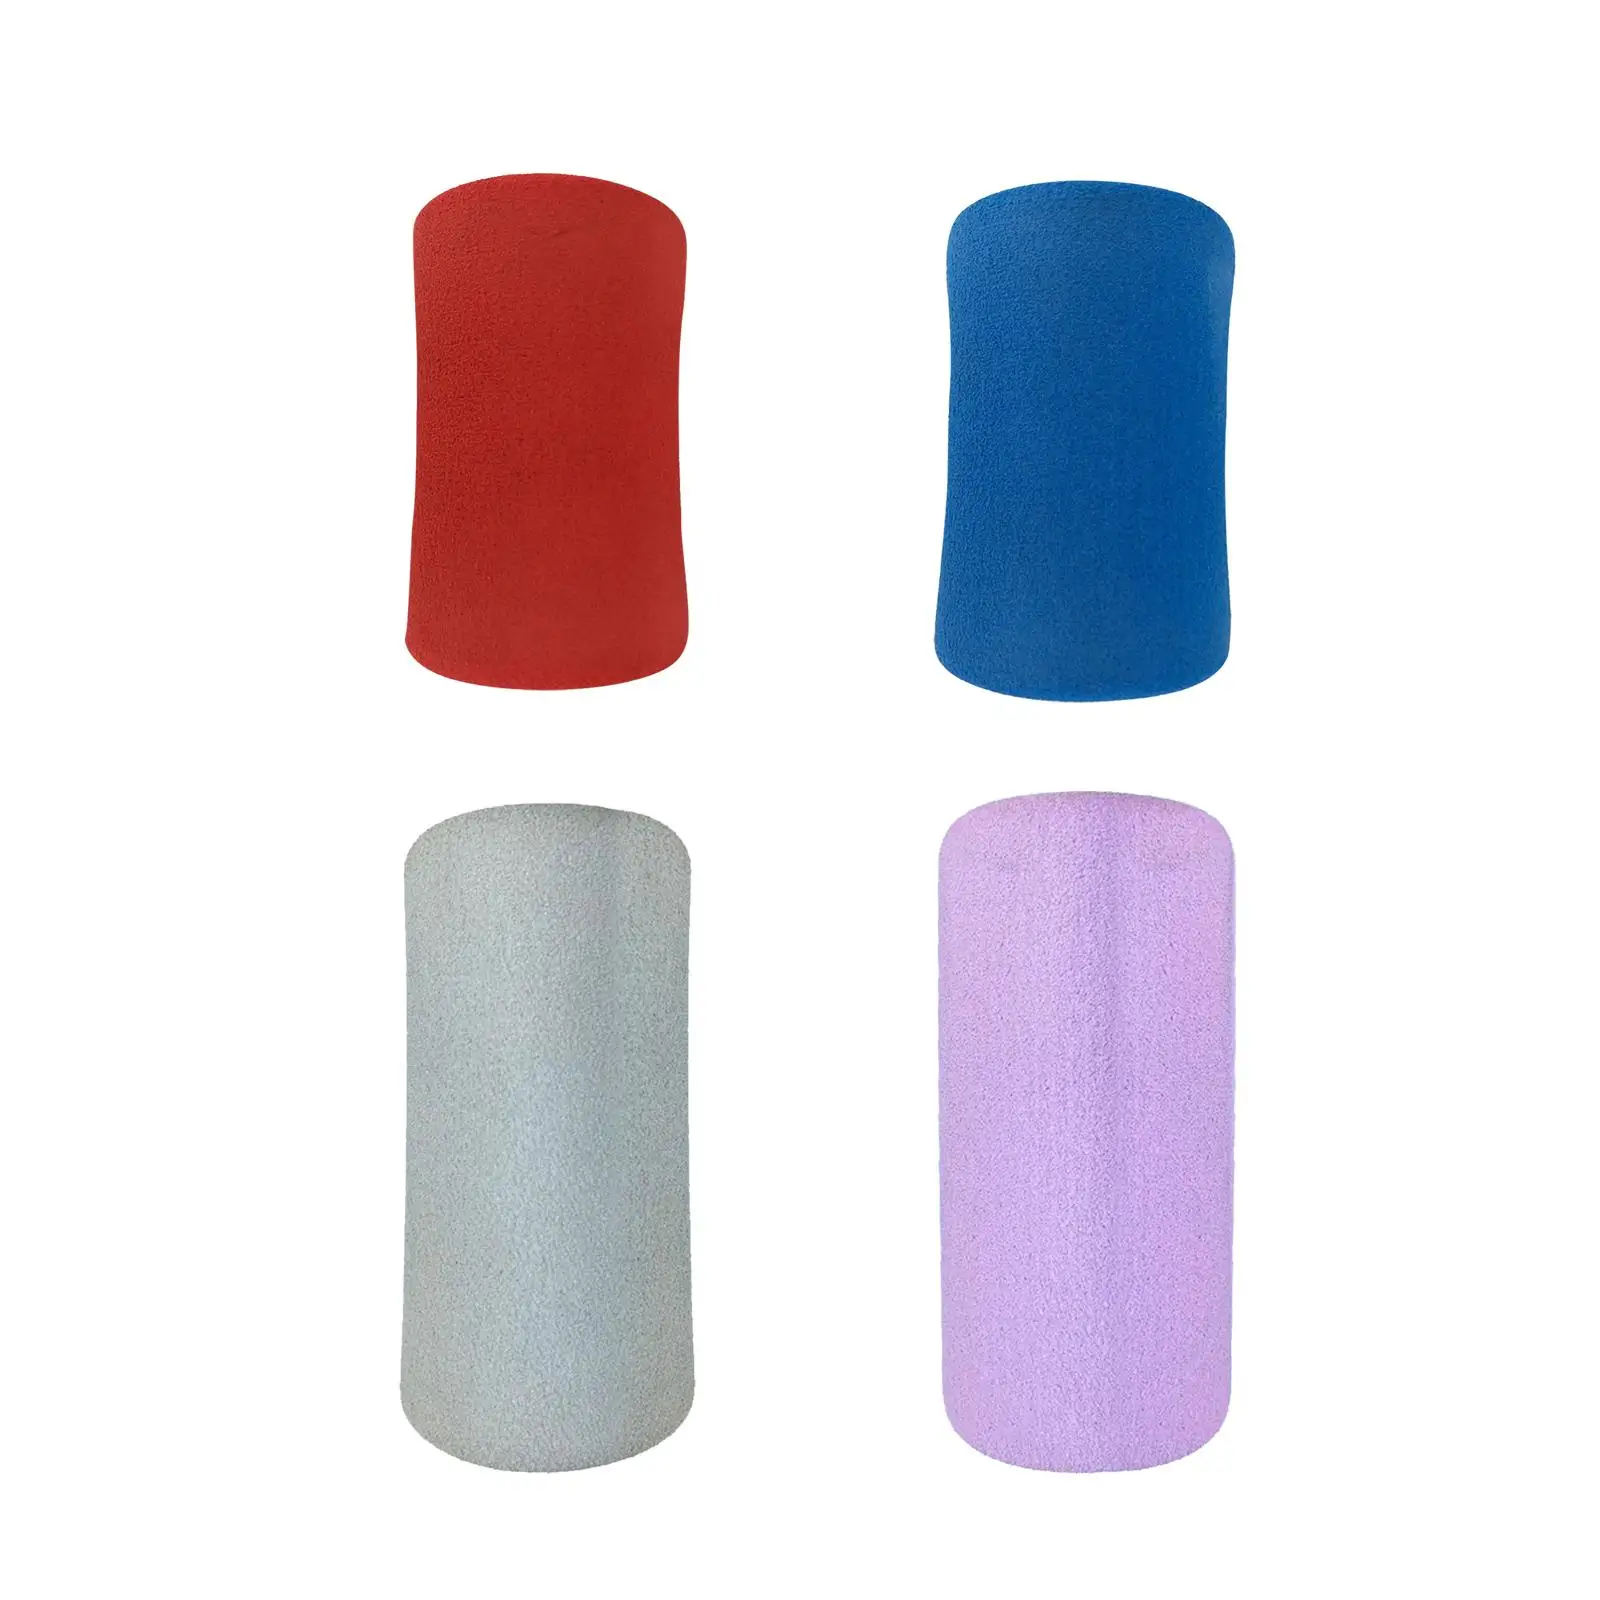 Foam Foot Pads Rollers Sponge Sleeve for Strength Training Weight Bench Exercise Machines Fitness Equipments Abdominal Trainer